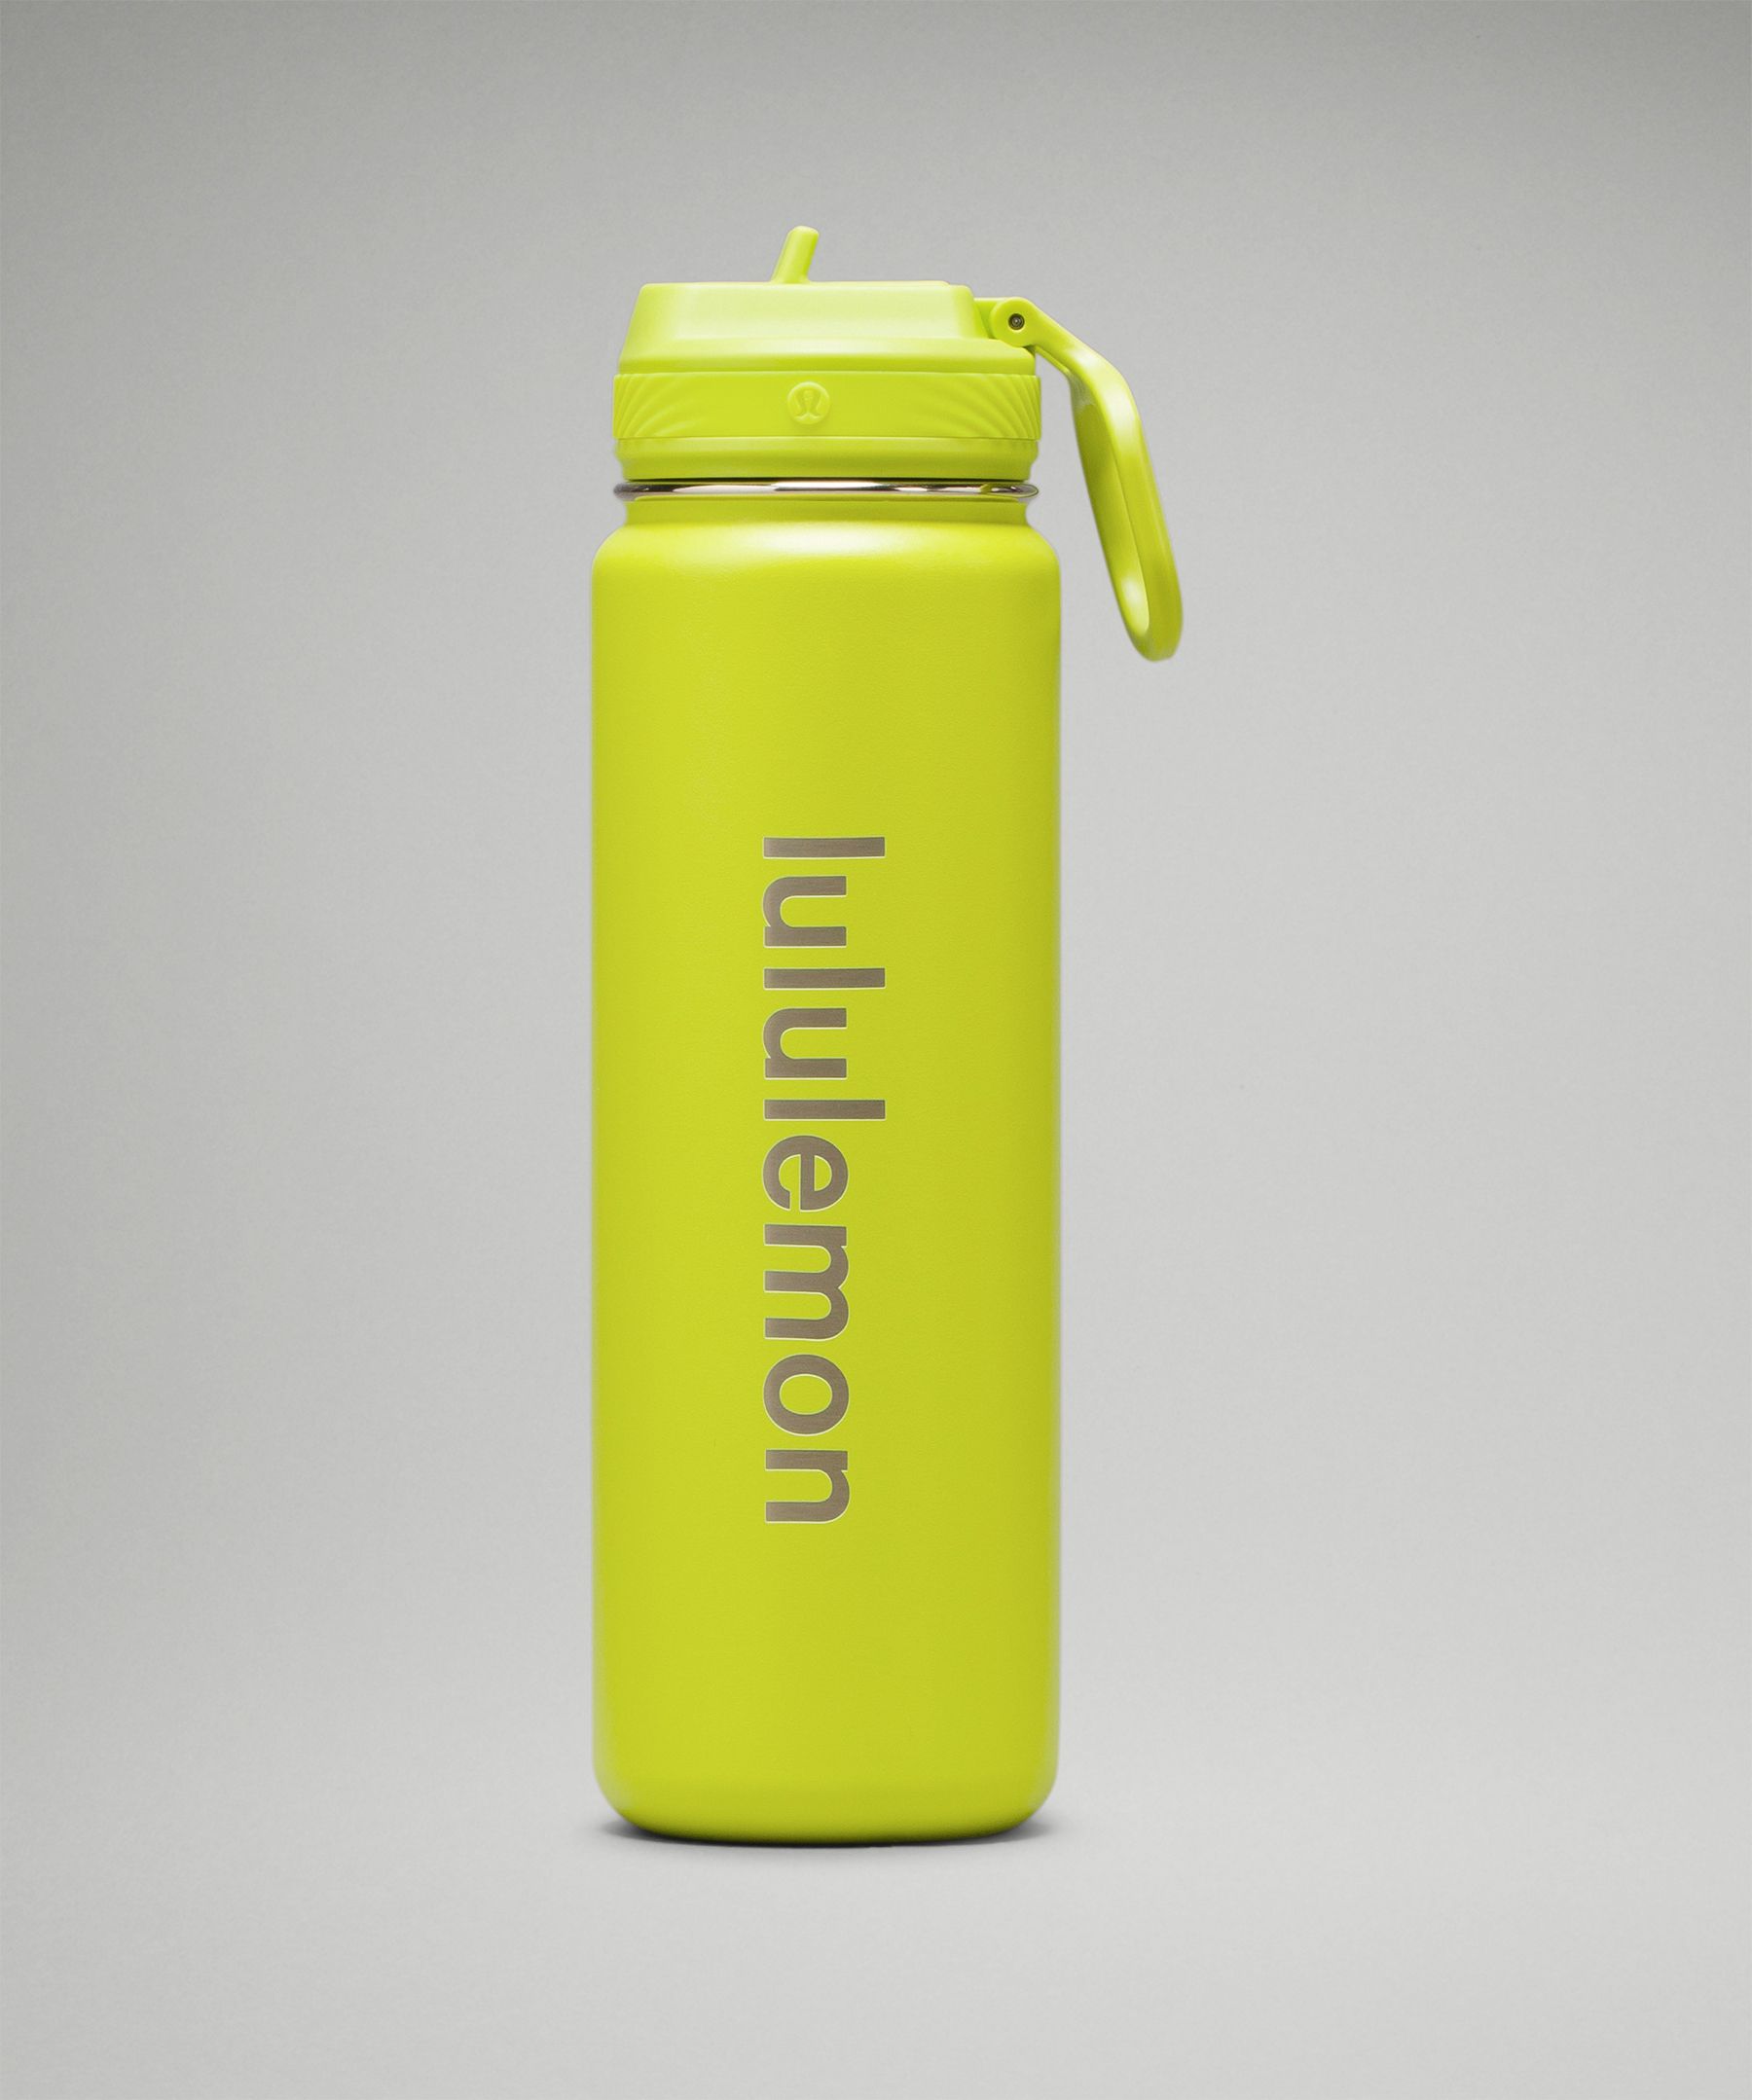 Lululemon Back to Life Sports Insulated Water Bottle Flip Top White 24 oz